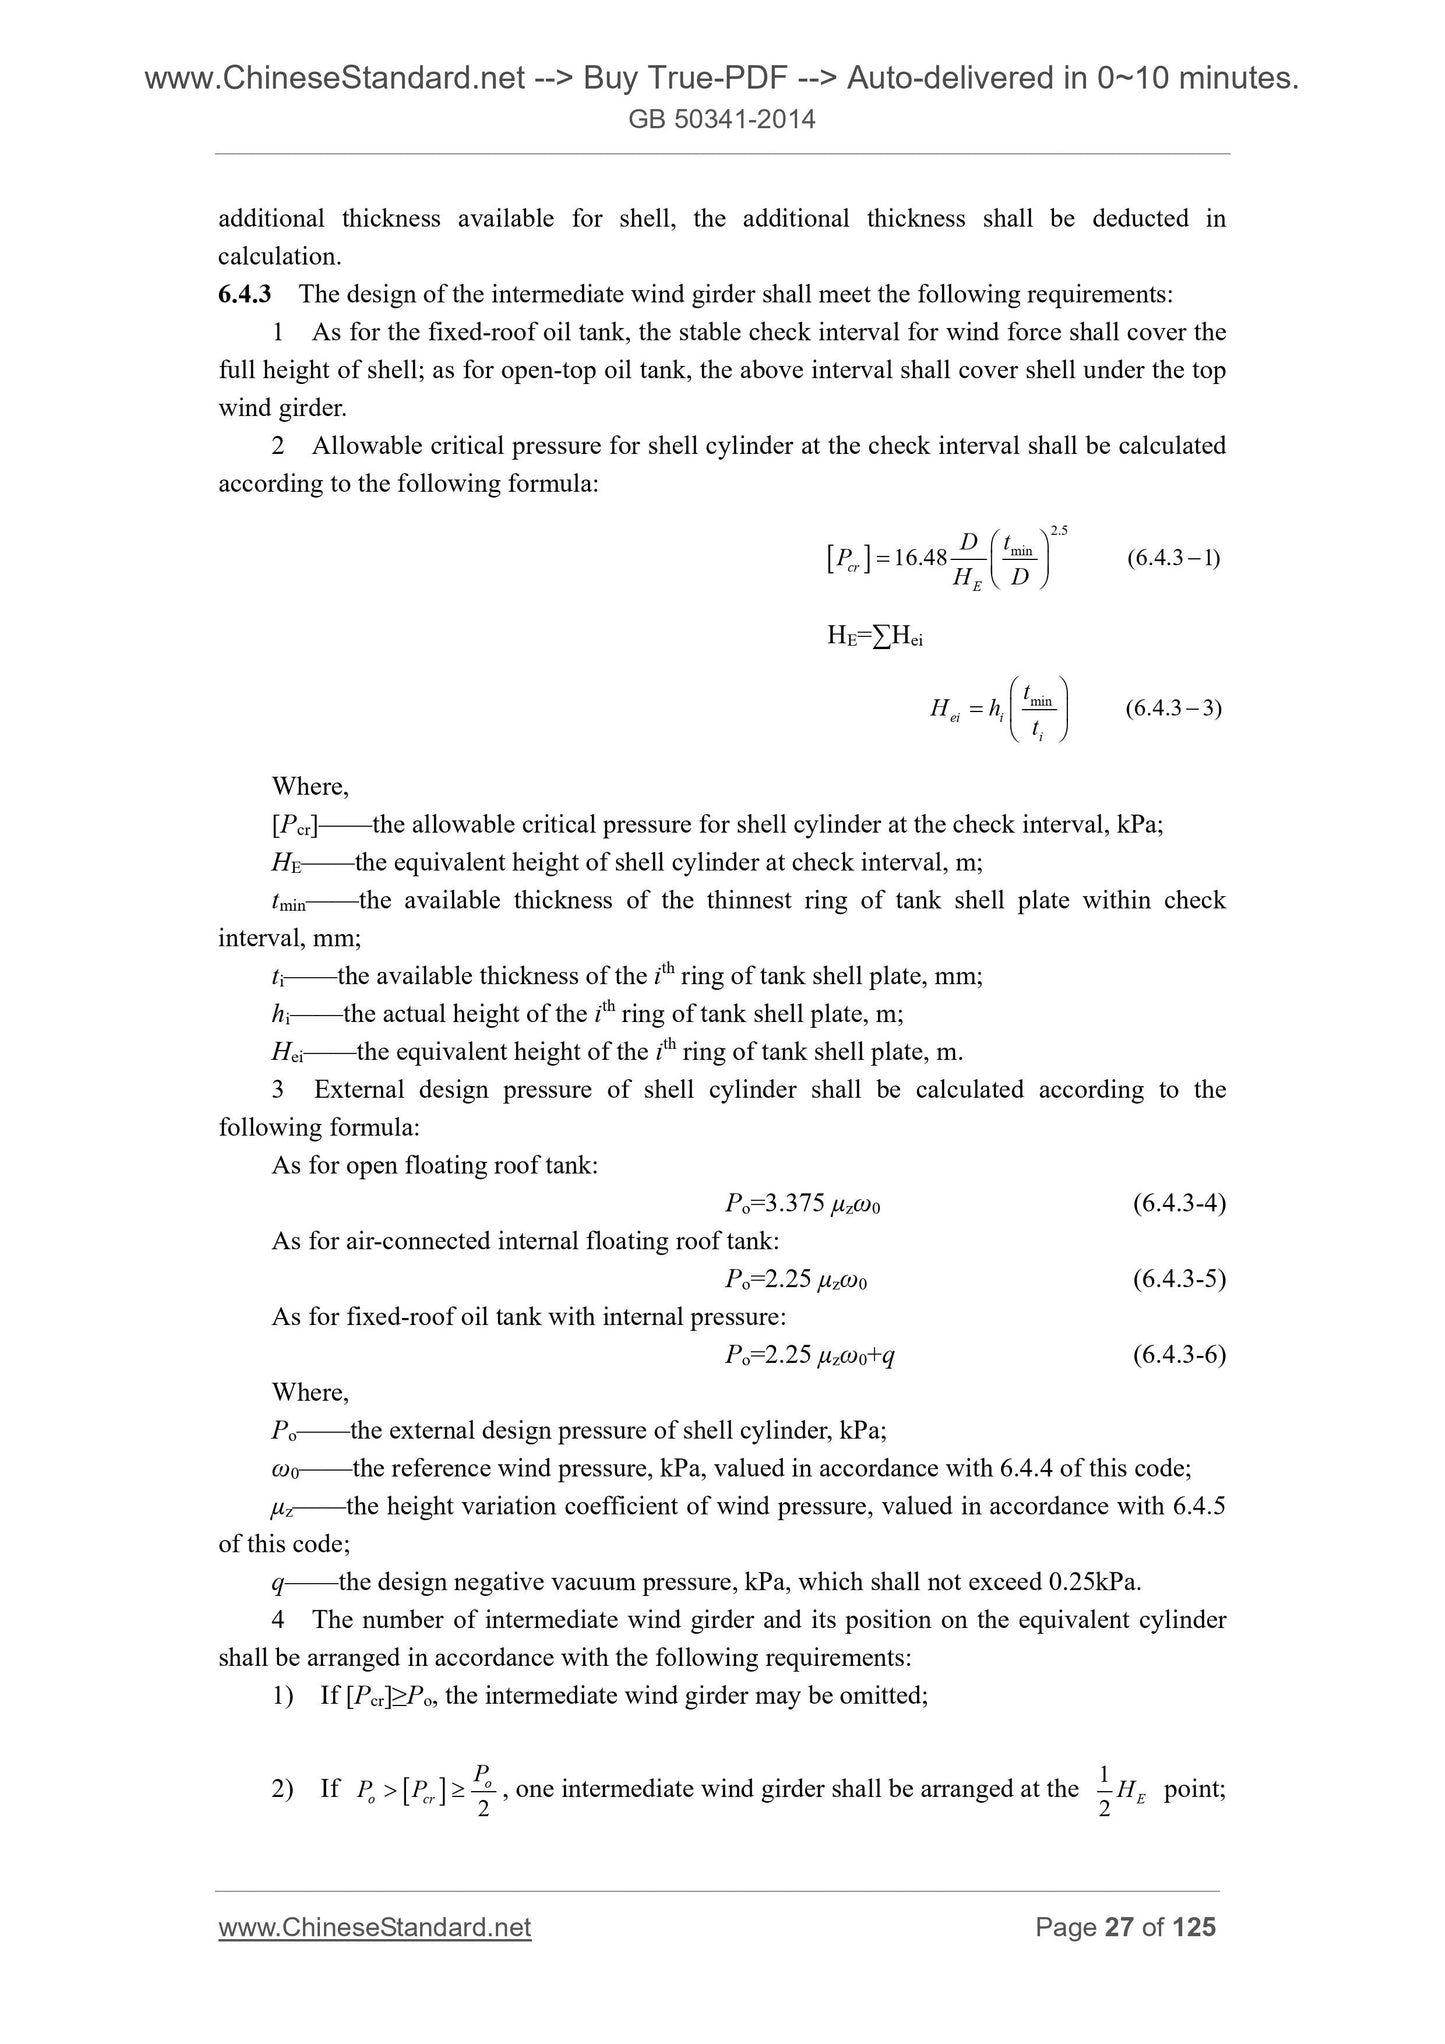 GB 50341-2014 Page 9